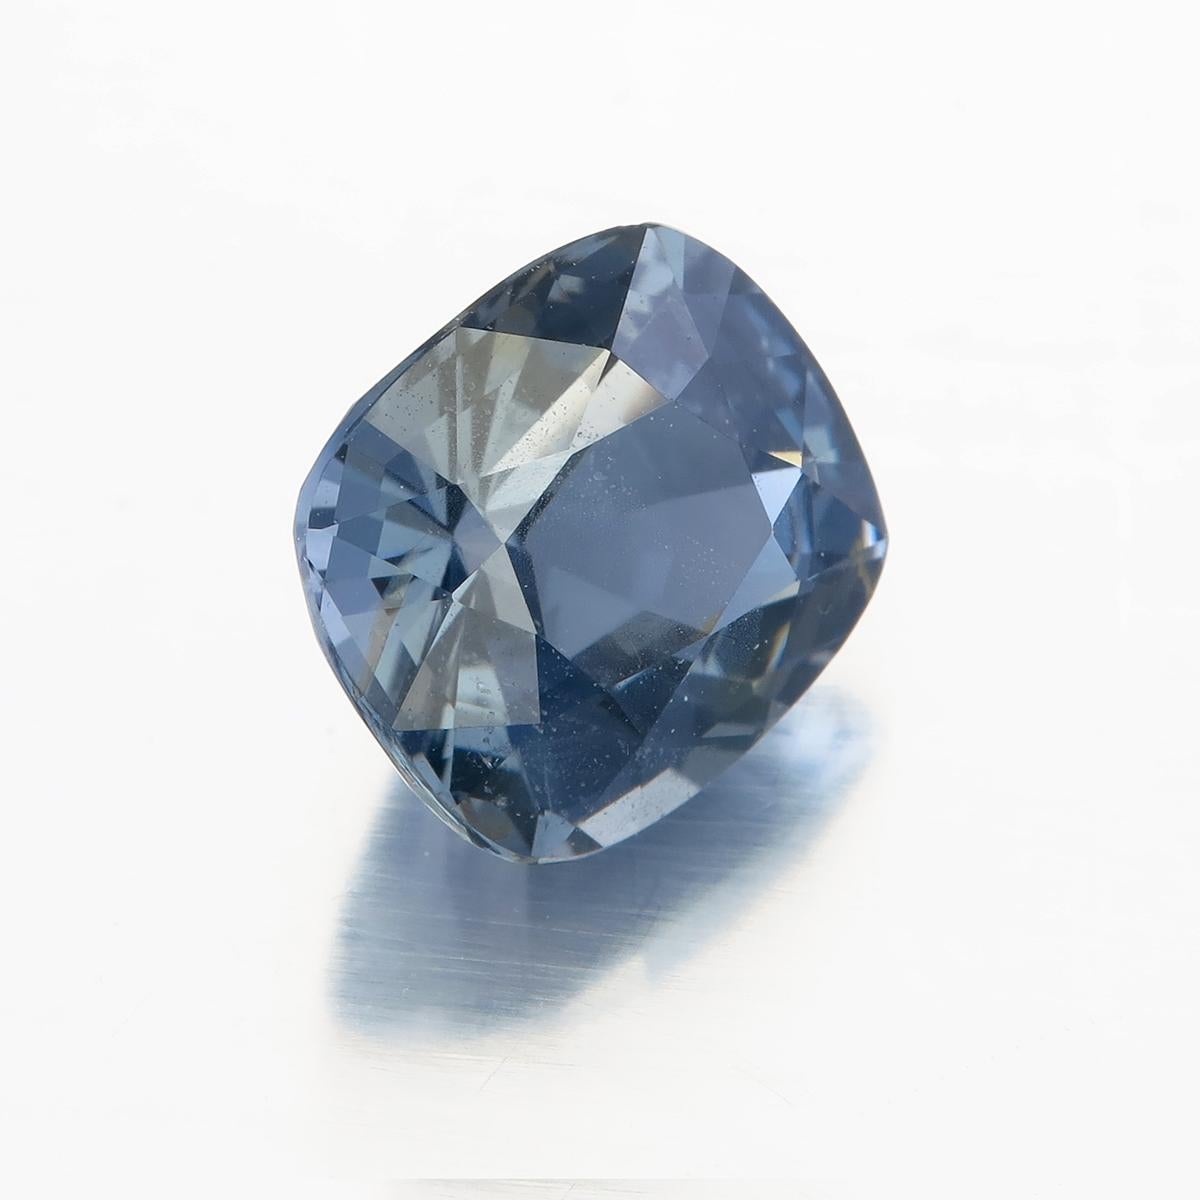 Antique Cushion Cut Lotus Certified 3.41 Carat Gray Spinel from Sri Lanka 'Ceylon' For Sale